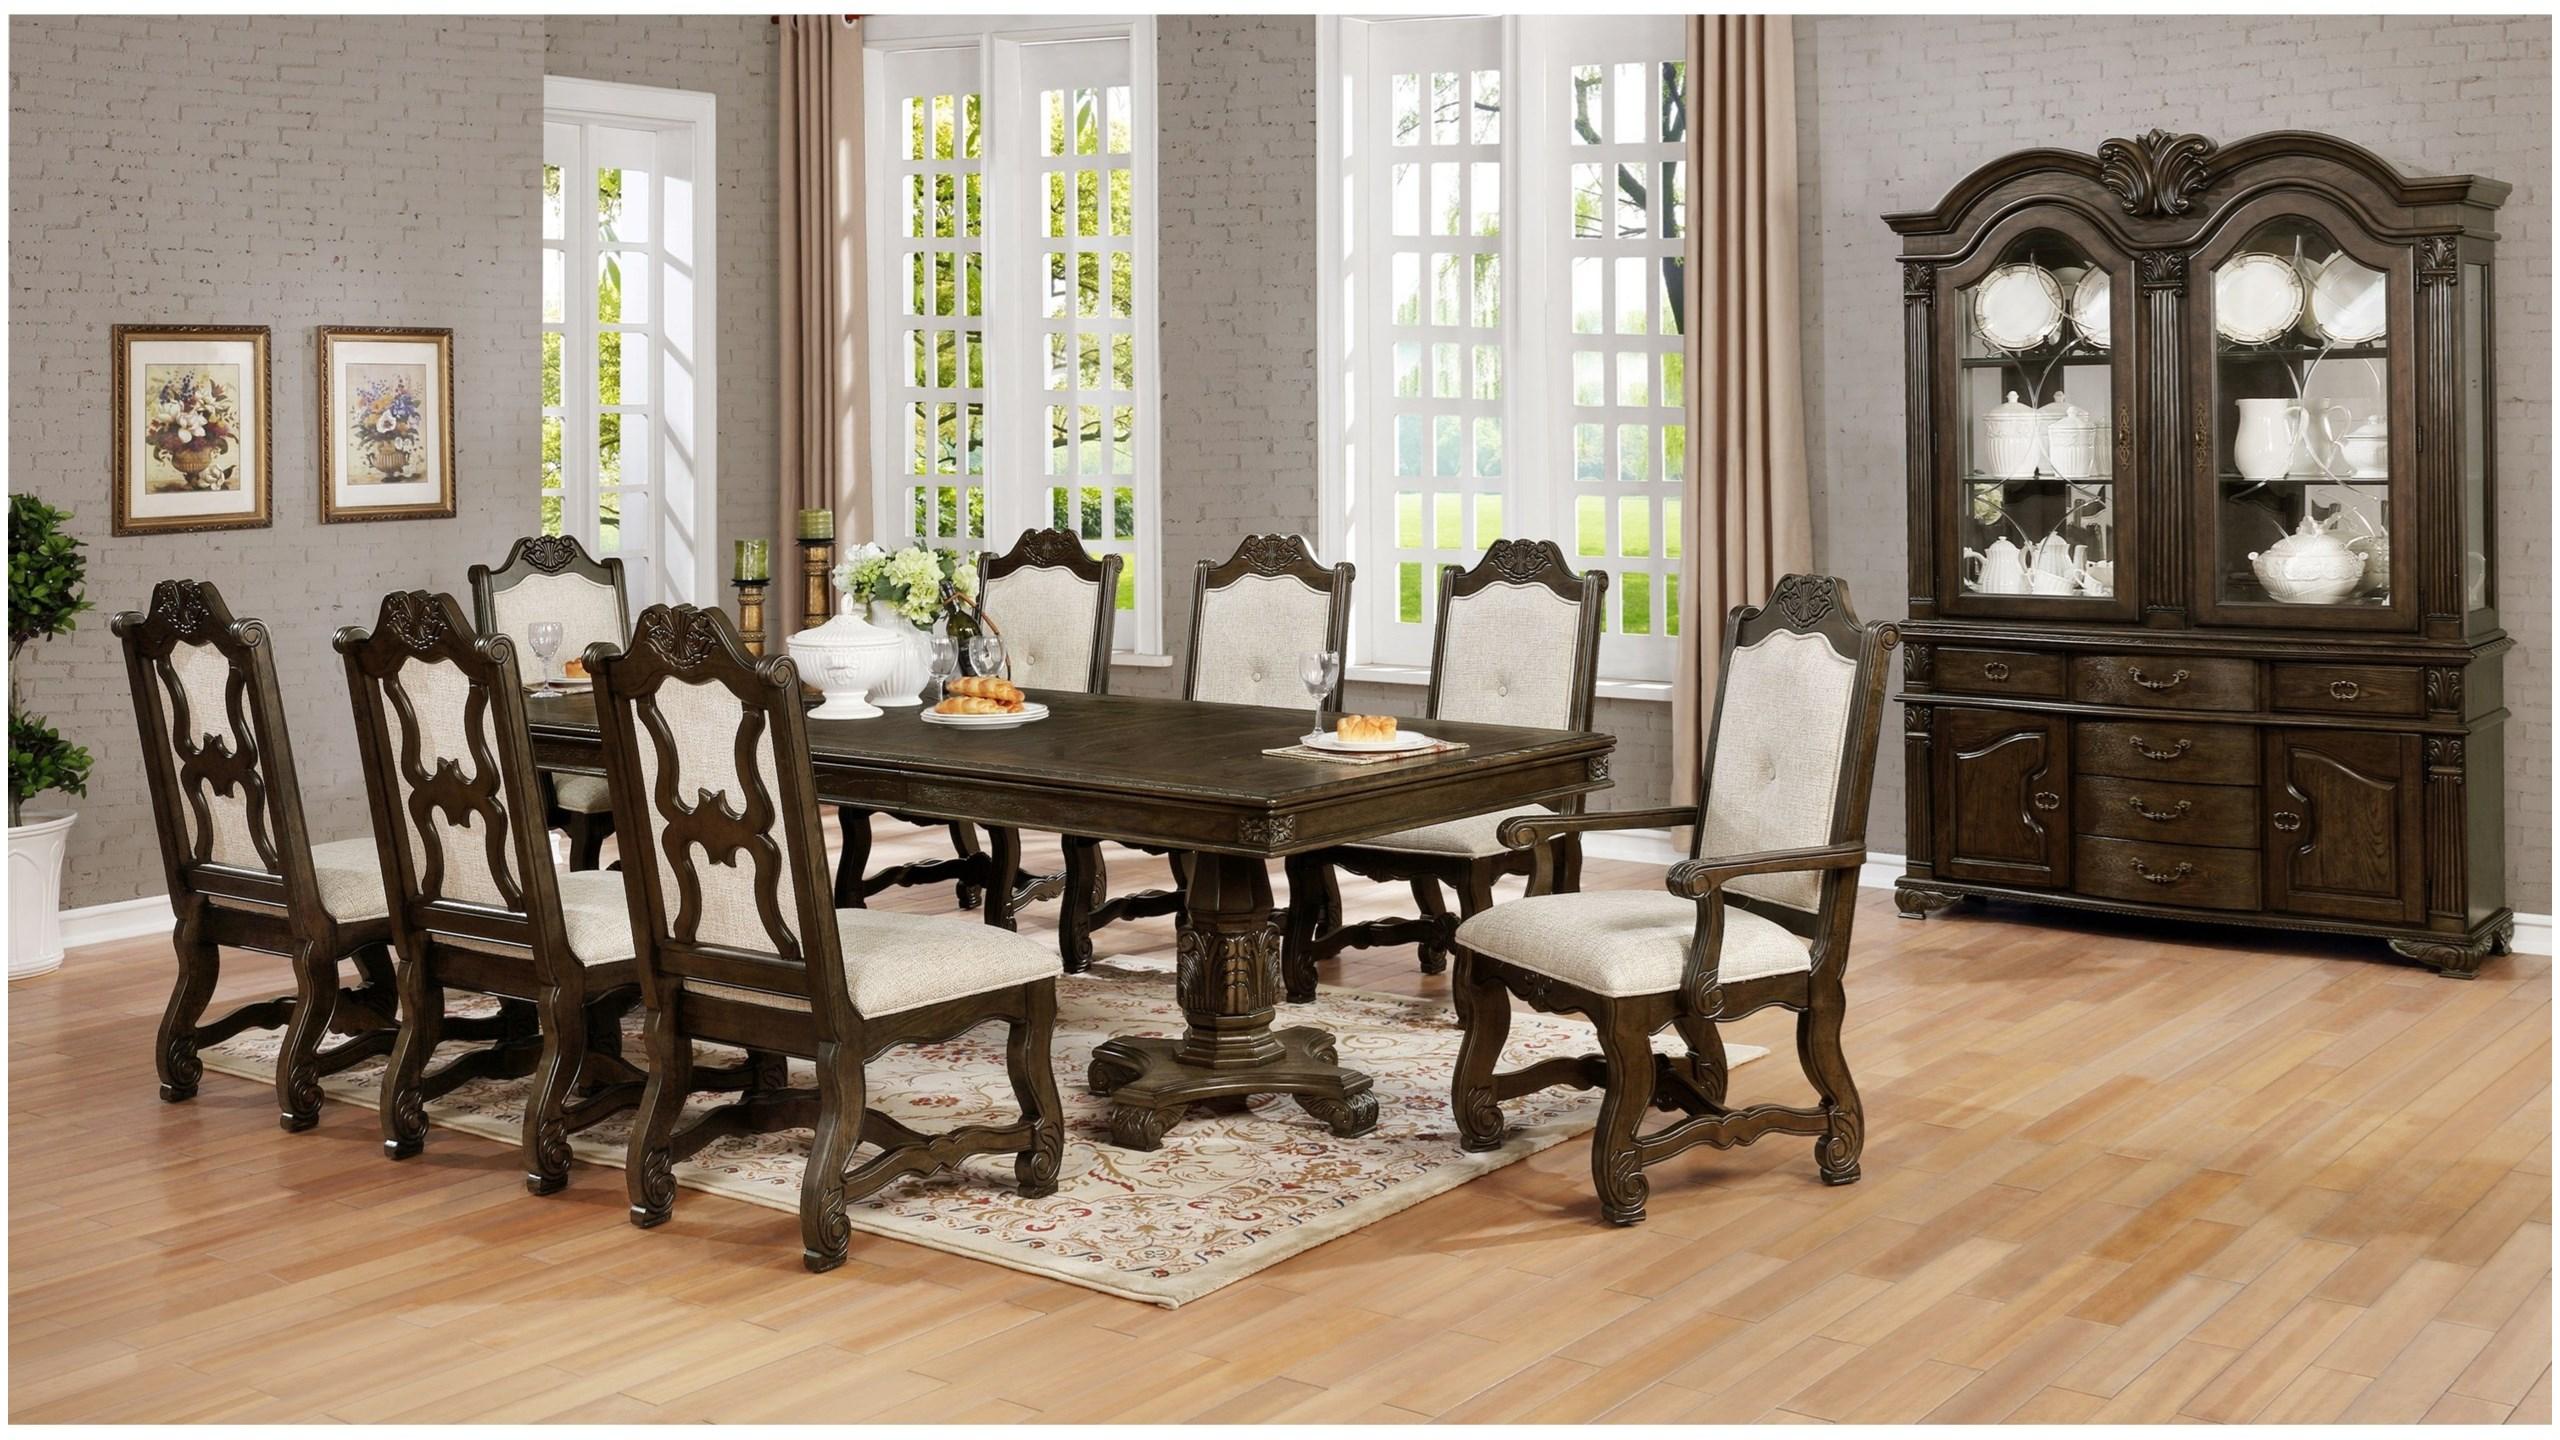 Traditional, Vintage Dining Room Set Neo Renaissance 2420T-44108-11pcs in Rustic Brown 